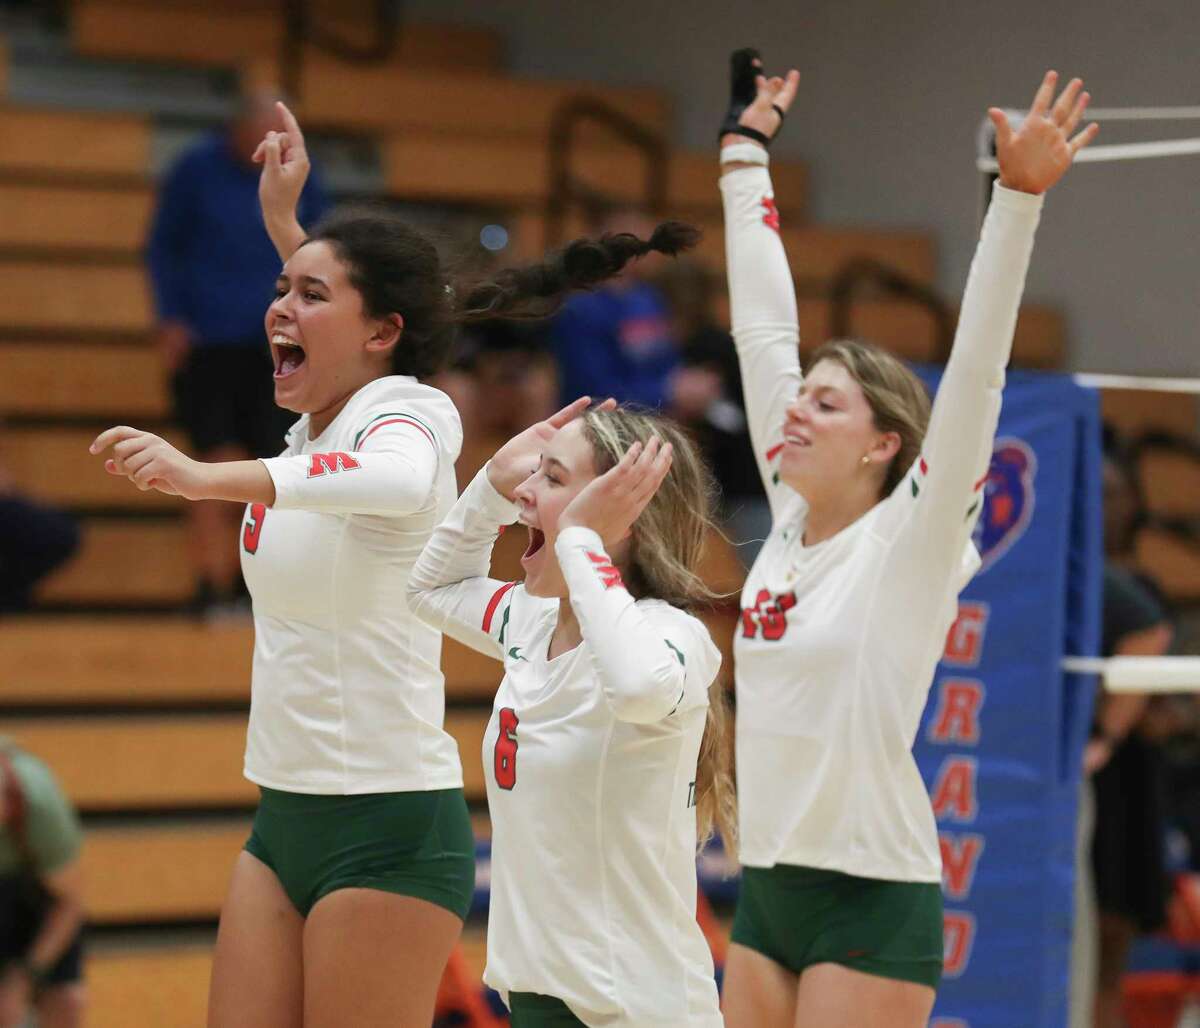 The Woodlands celebrates after defeating Grand Oaks 25-23 in five sets during a District 13-6A high school volleyball match at Grand Oaks High School, Tuesday, Sept. 6, 2022, in Spring.